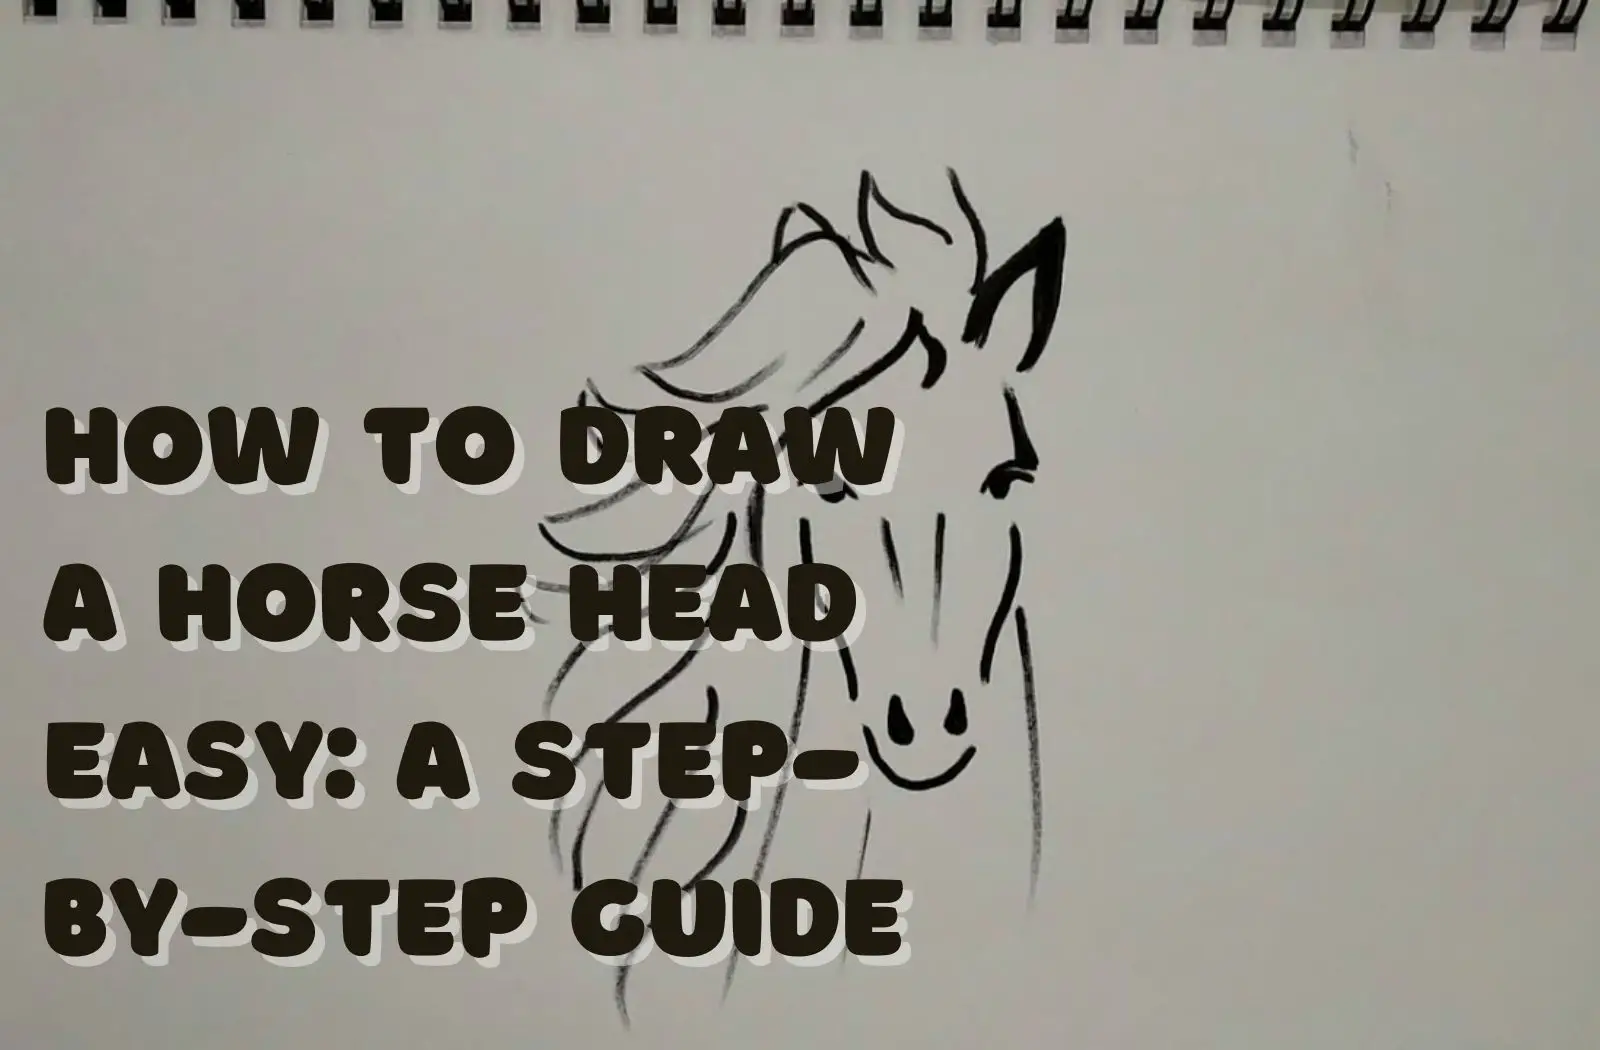 How to Draw a Horse Head Easy: A Step-by-Step Guide